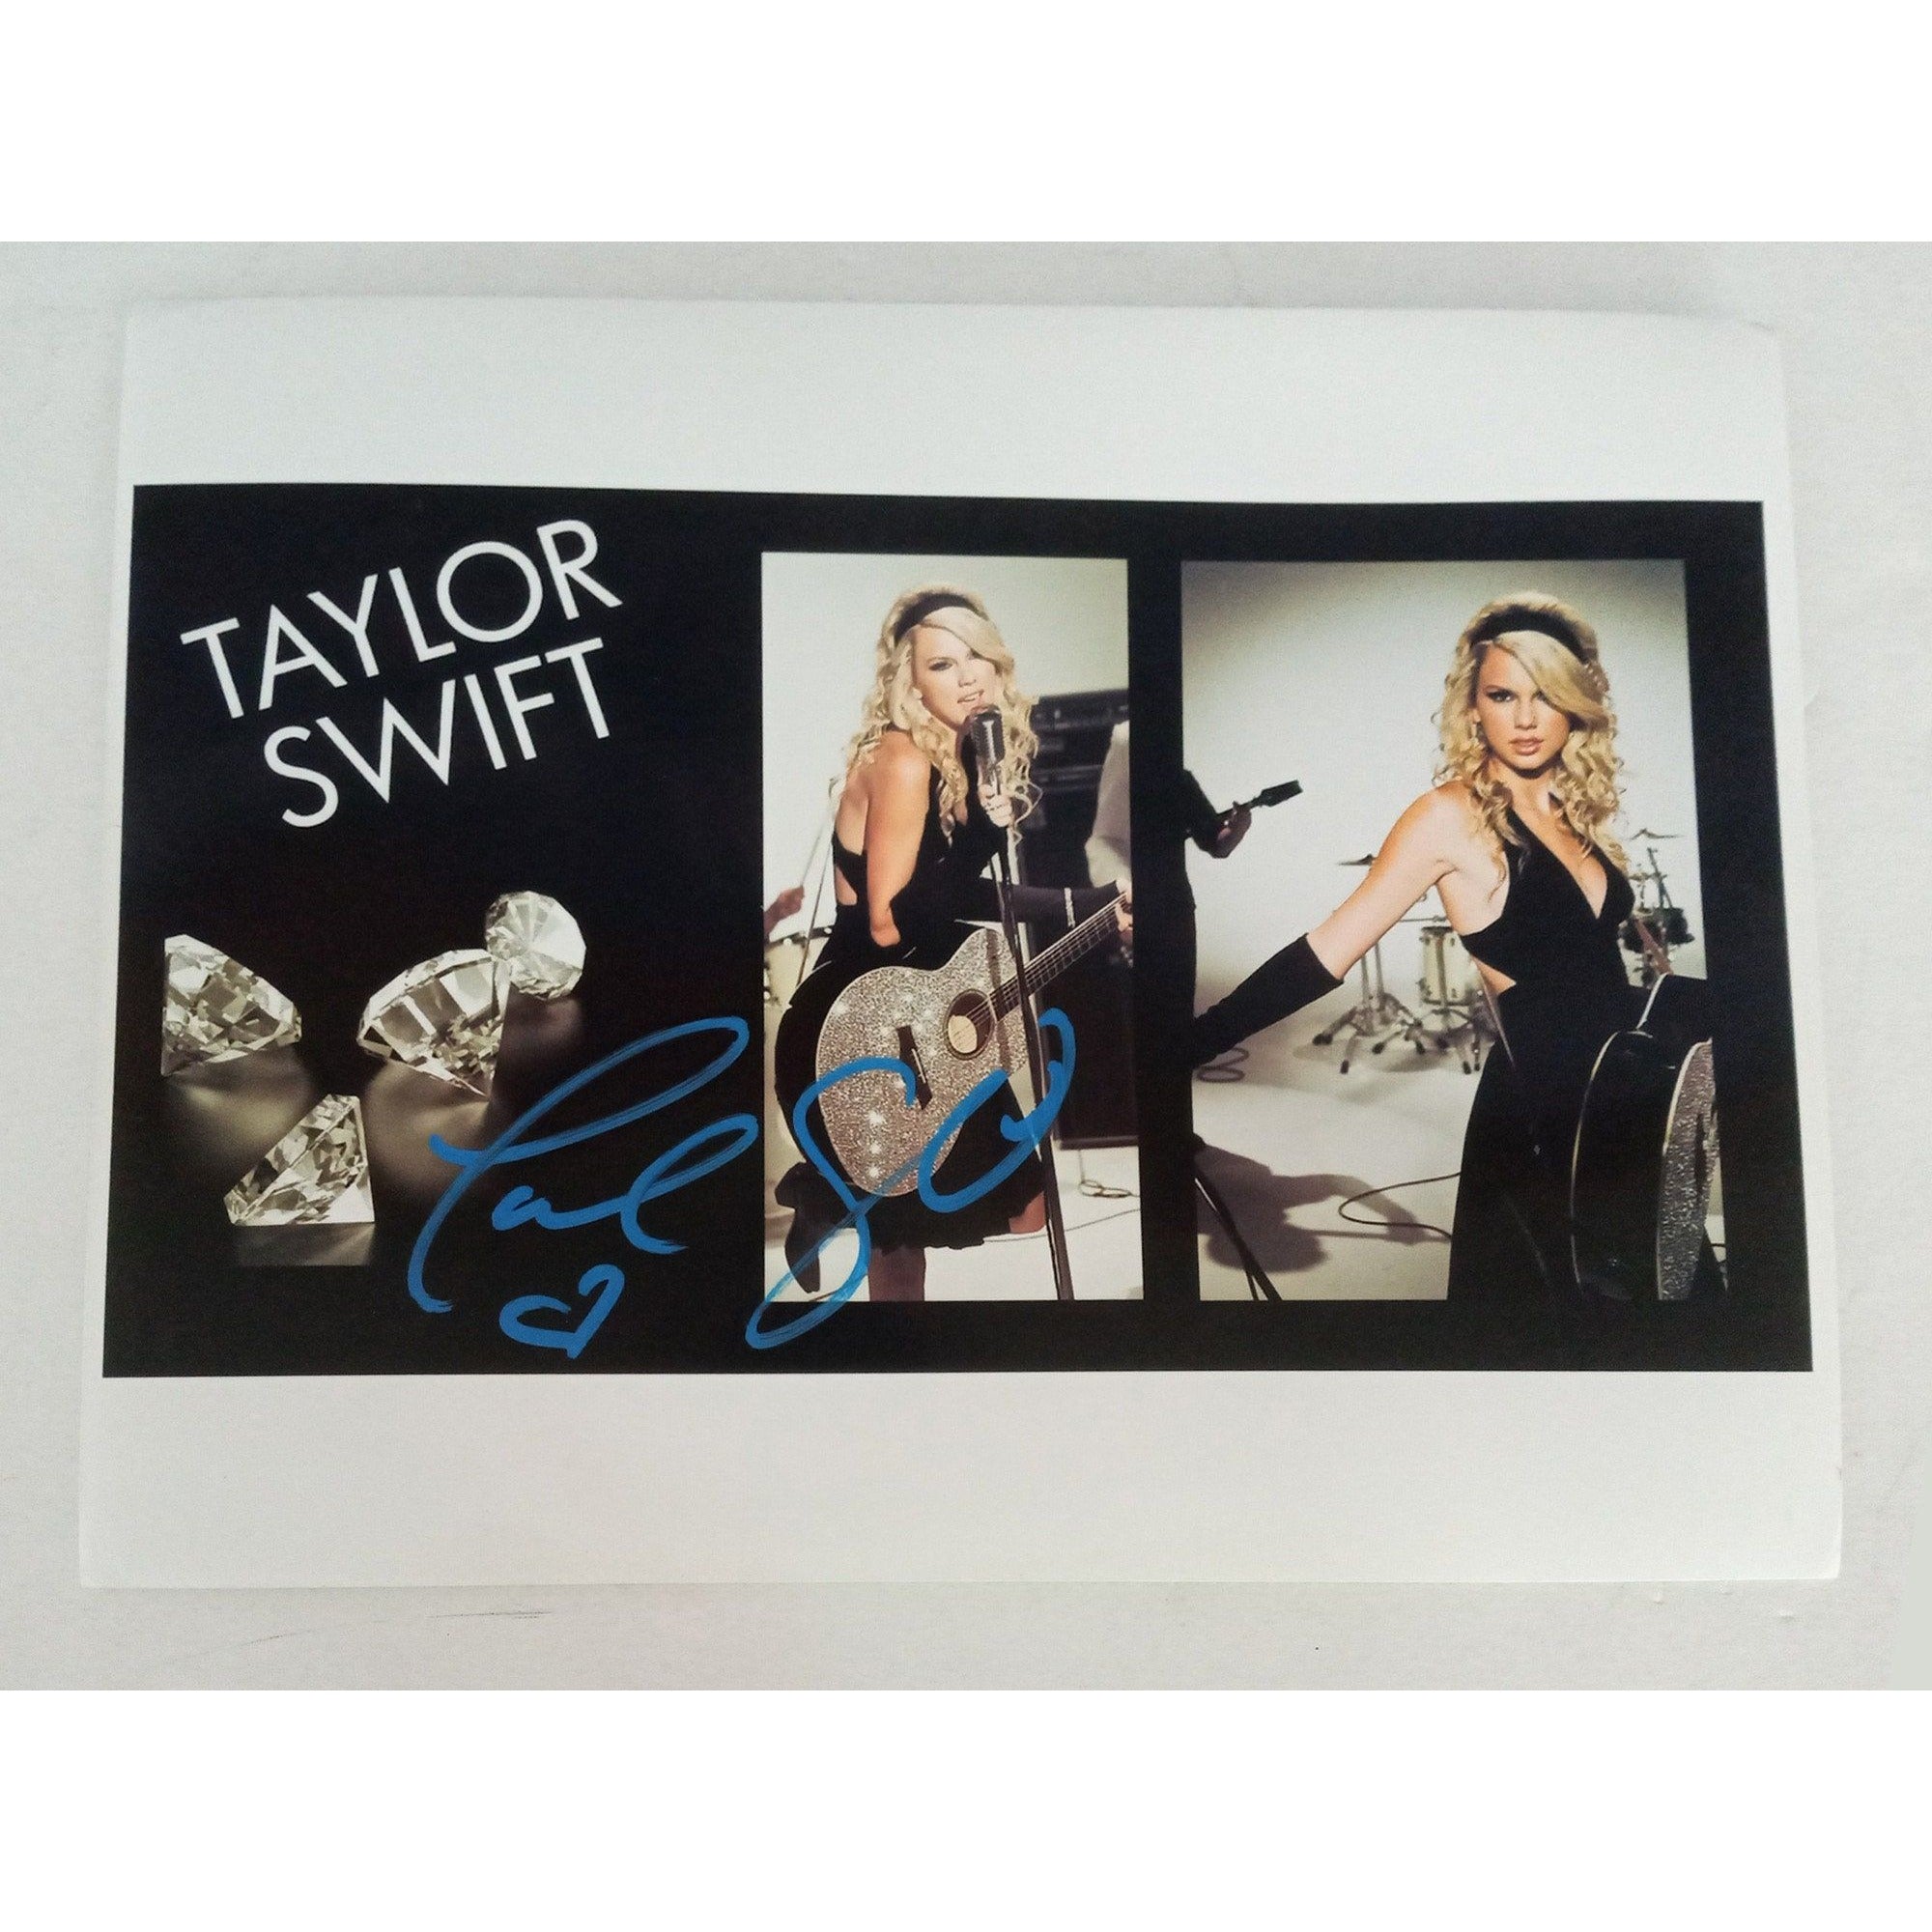 Taylor Swift 8 x 10 signed photo with proof